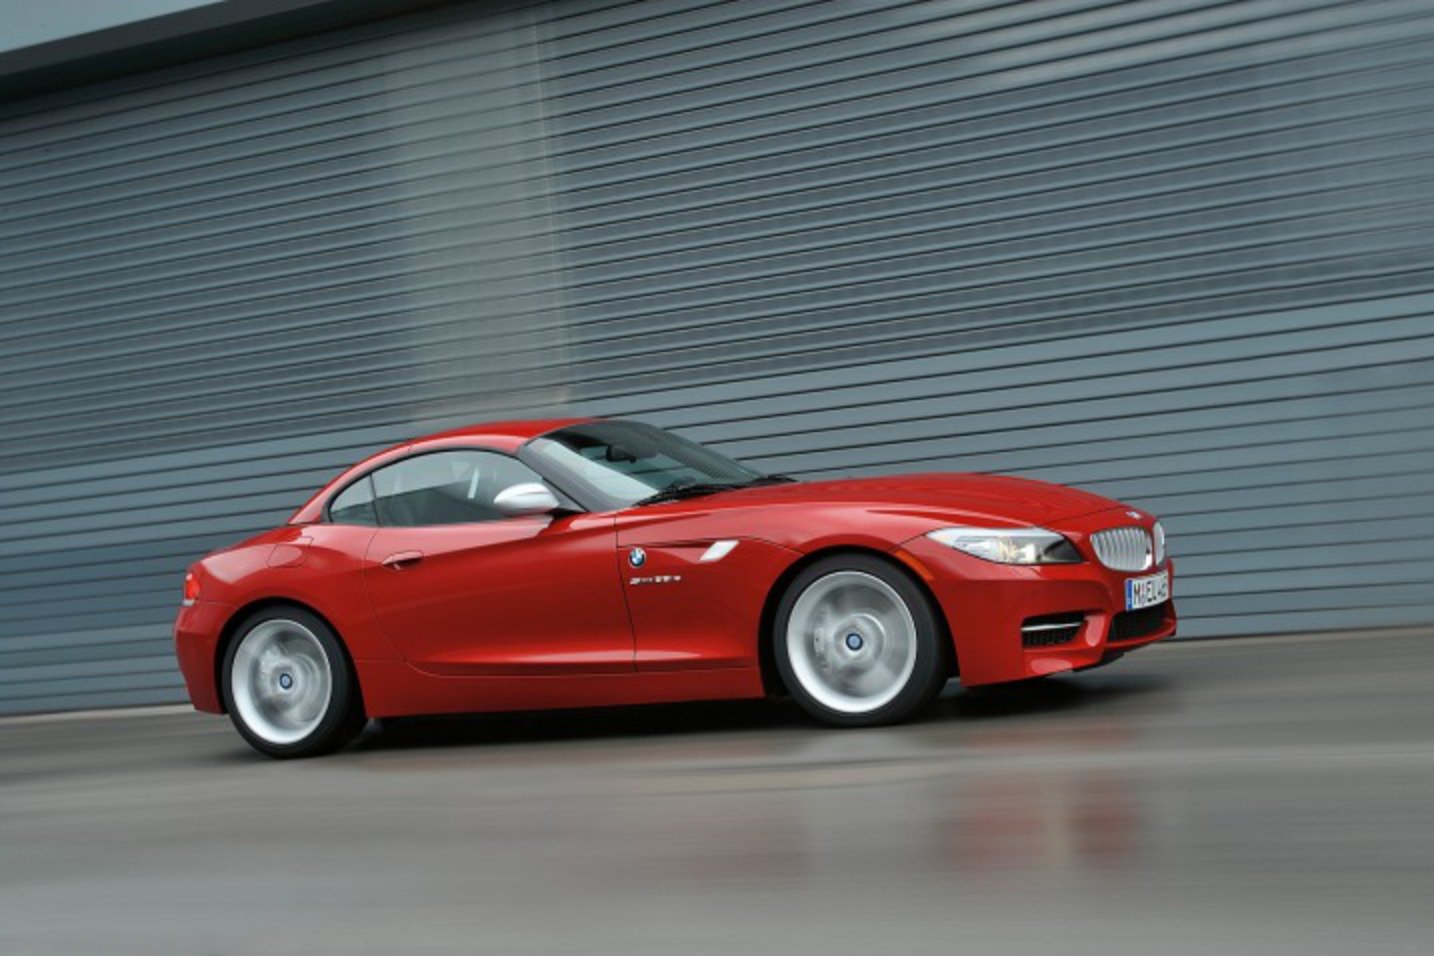 BMW Z4 sDrive 35is. View Download Wallpaper. 717x478. Comments